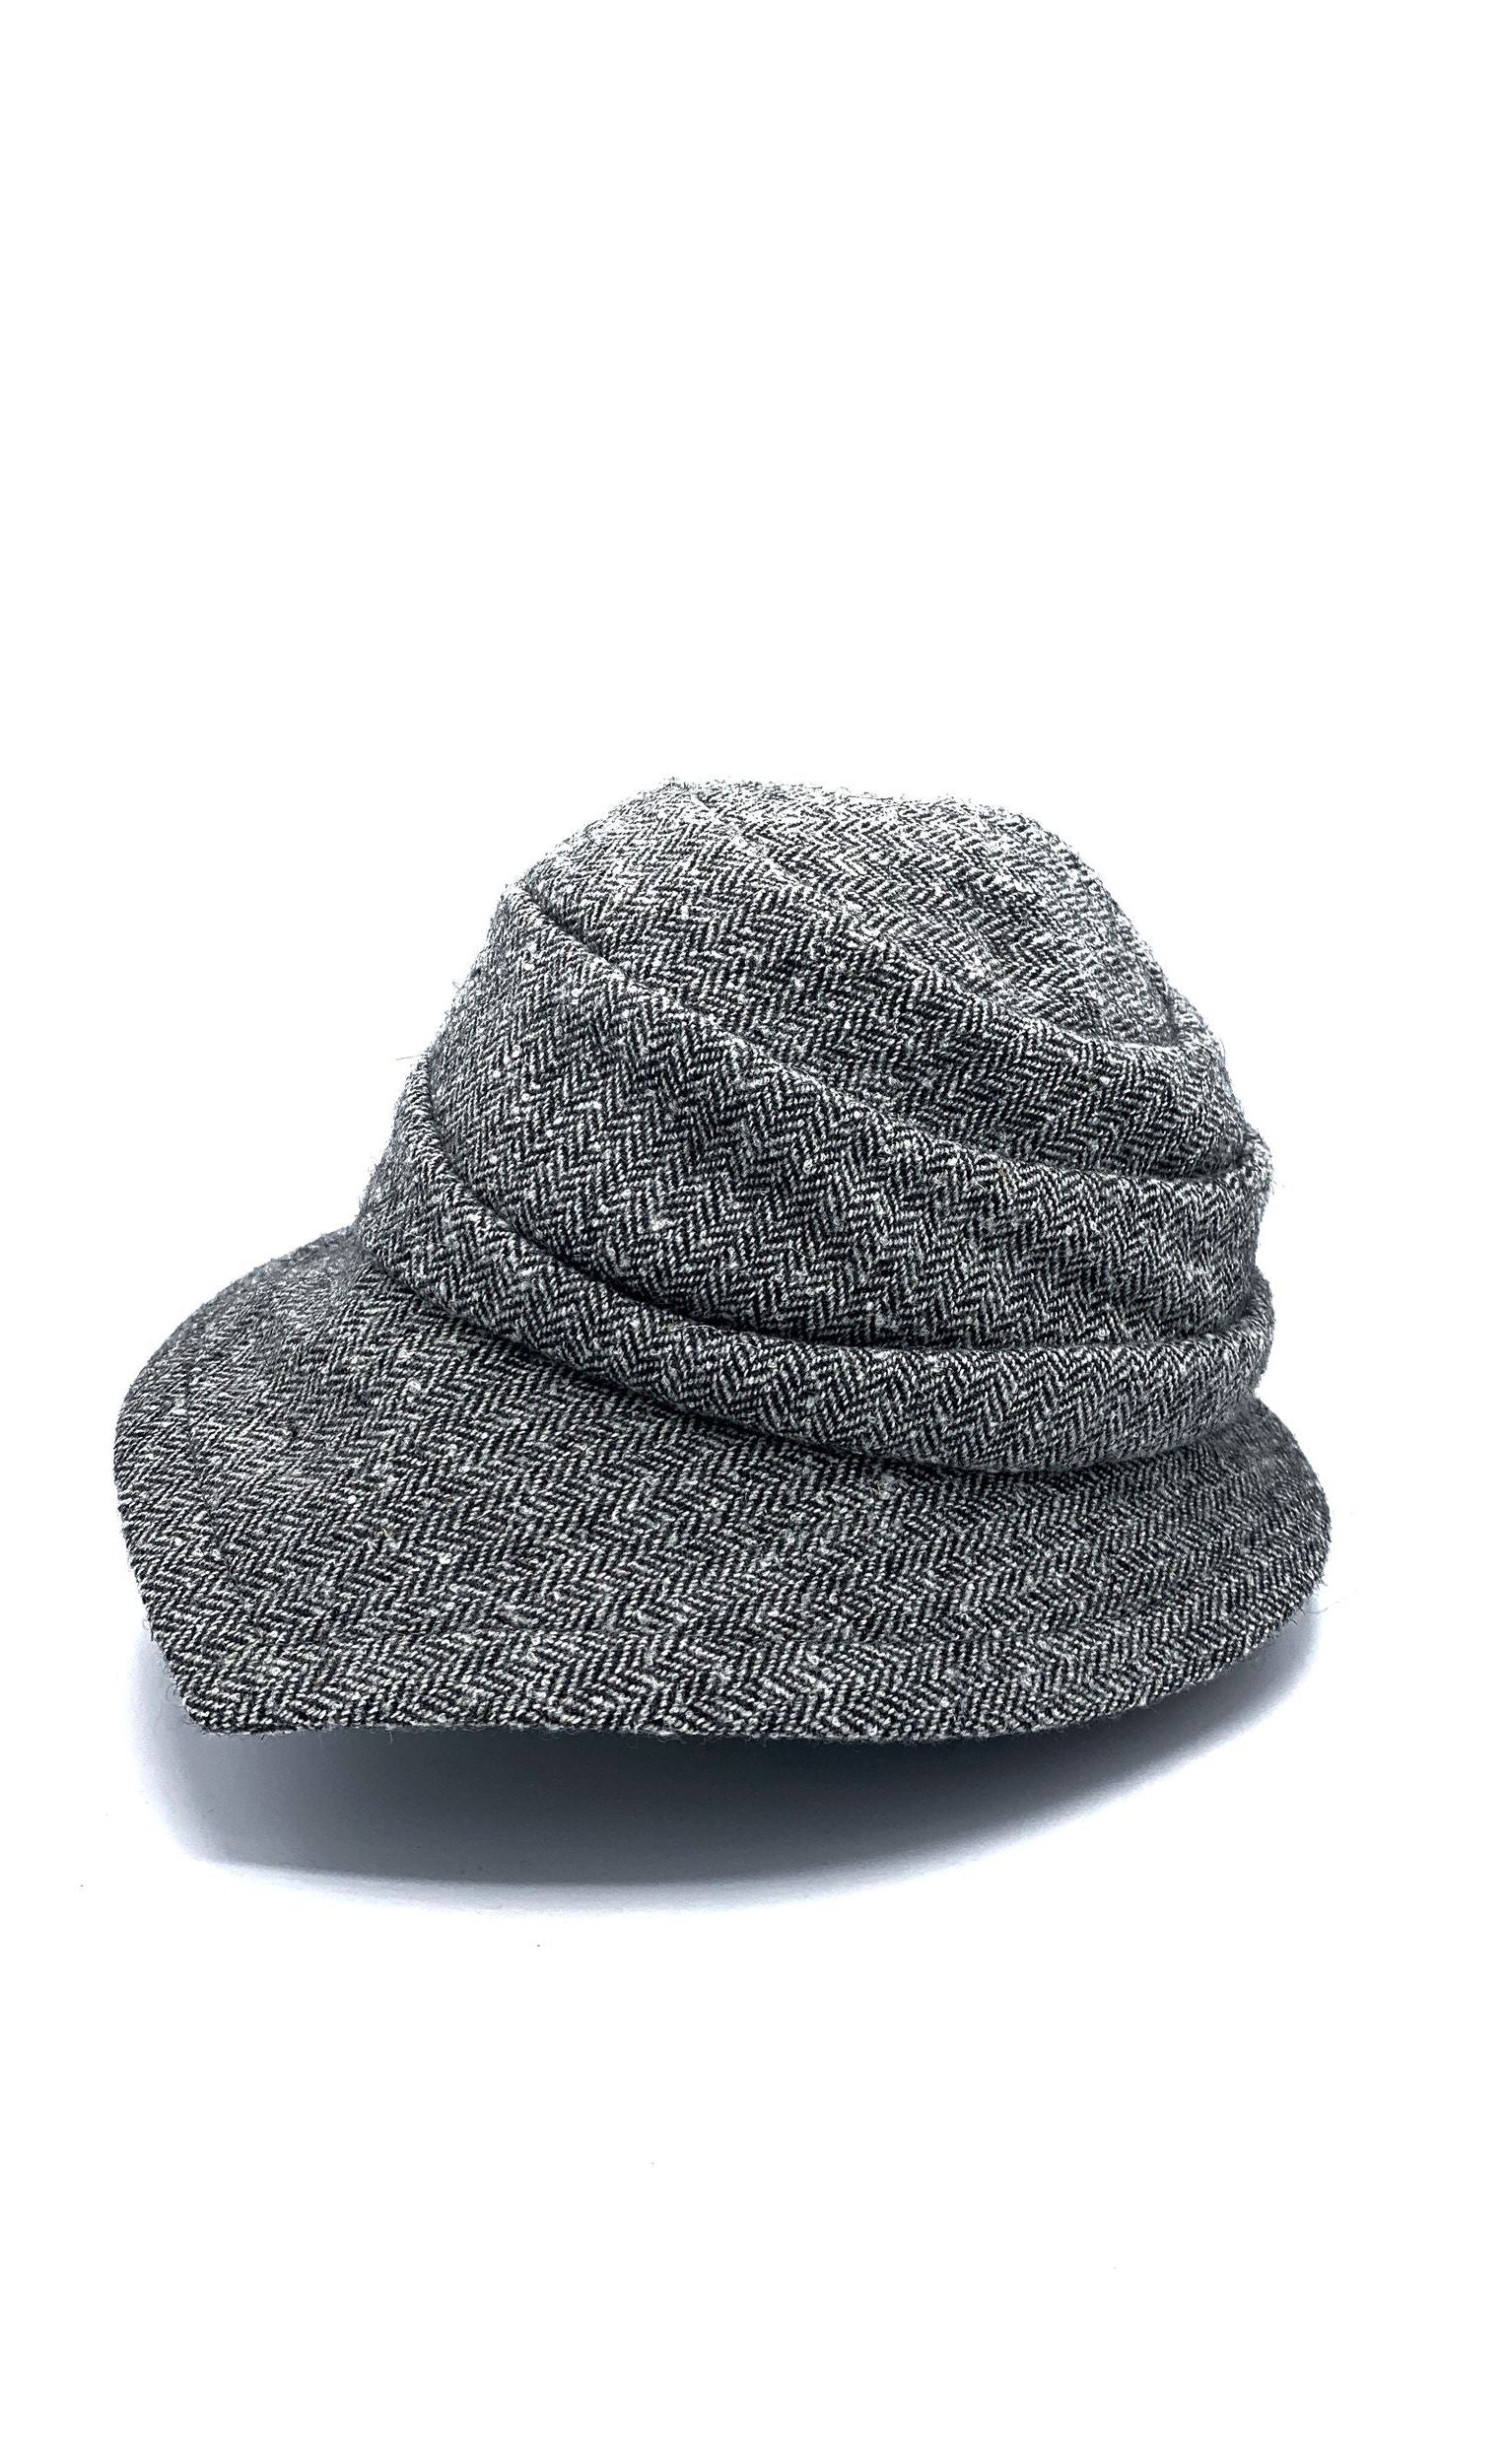 Left side view of the lillie & cohoe herringbone vintage phoebe hat. This hat has an asymmetrical pointed brim, a layered crown, and a grey herringbone pattern.